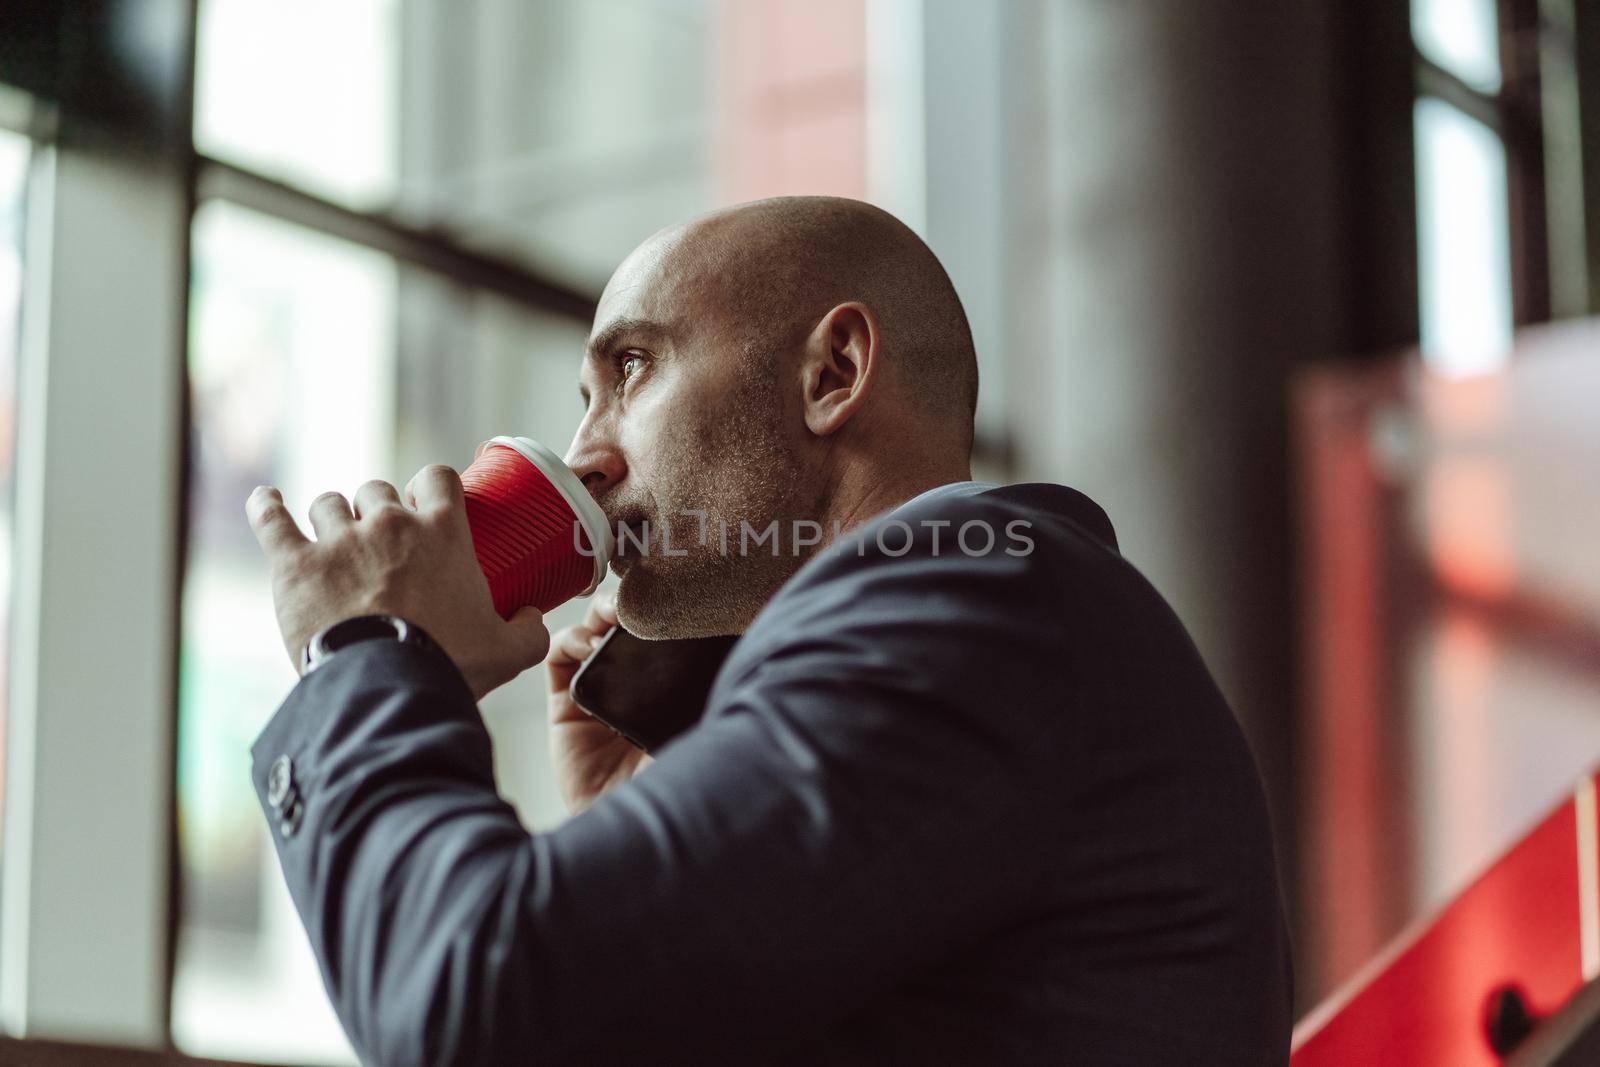 Mature business man in a business suit, talking on the phone while drinking coffee using disposable paper cup standing in a office building. Business concept.